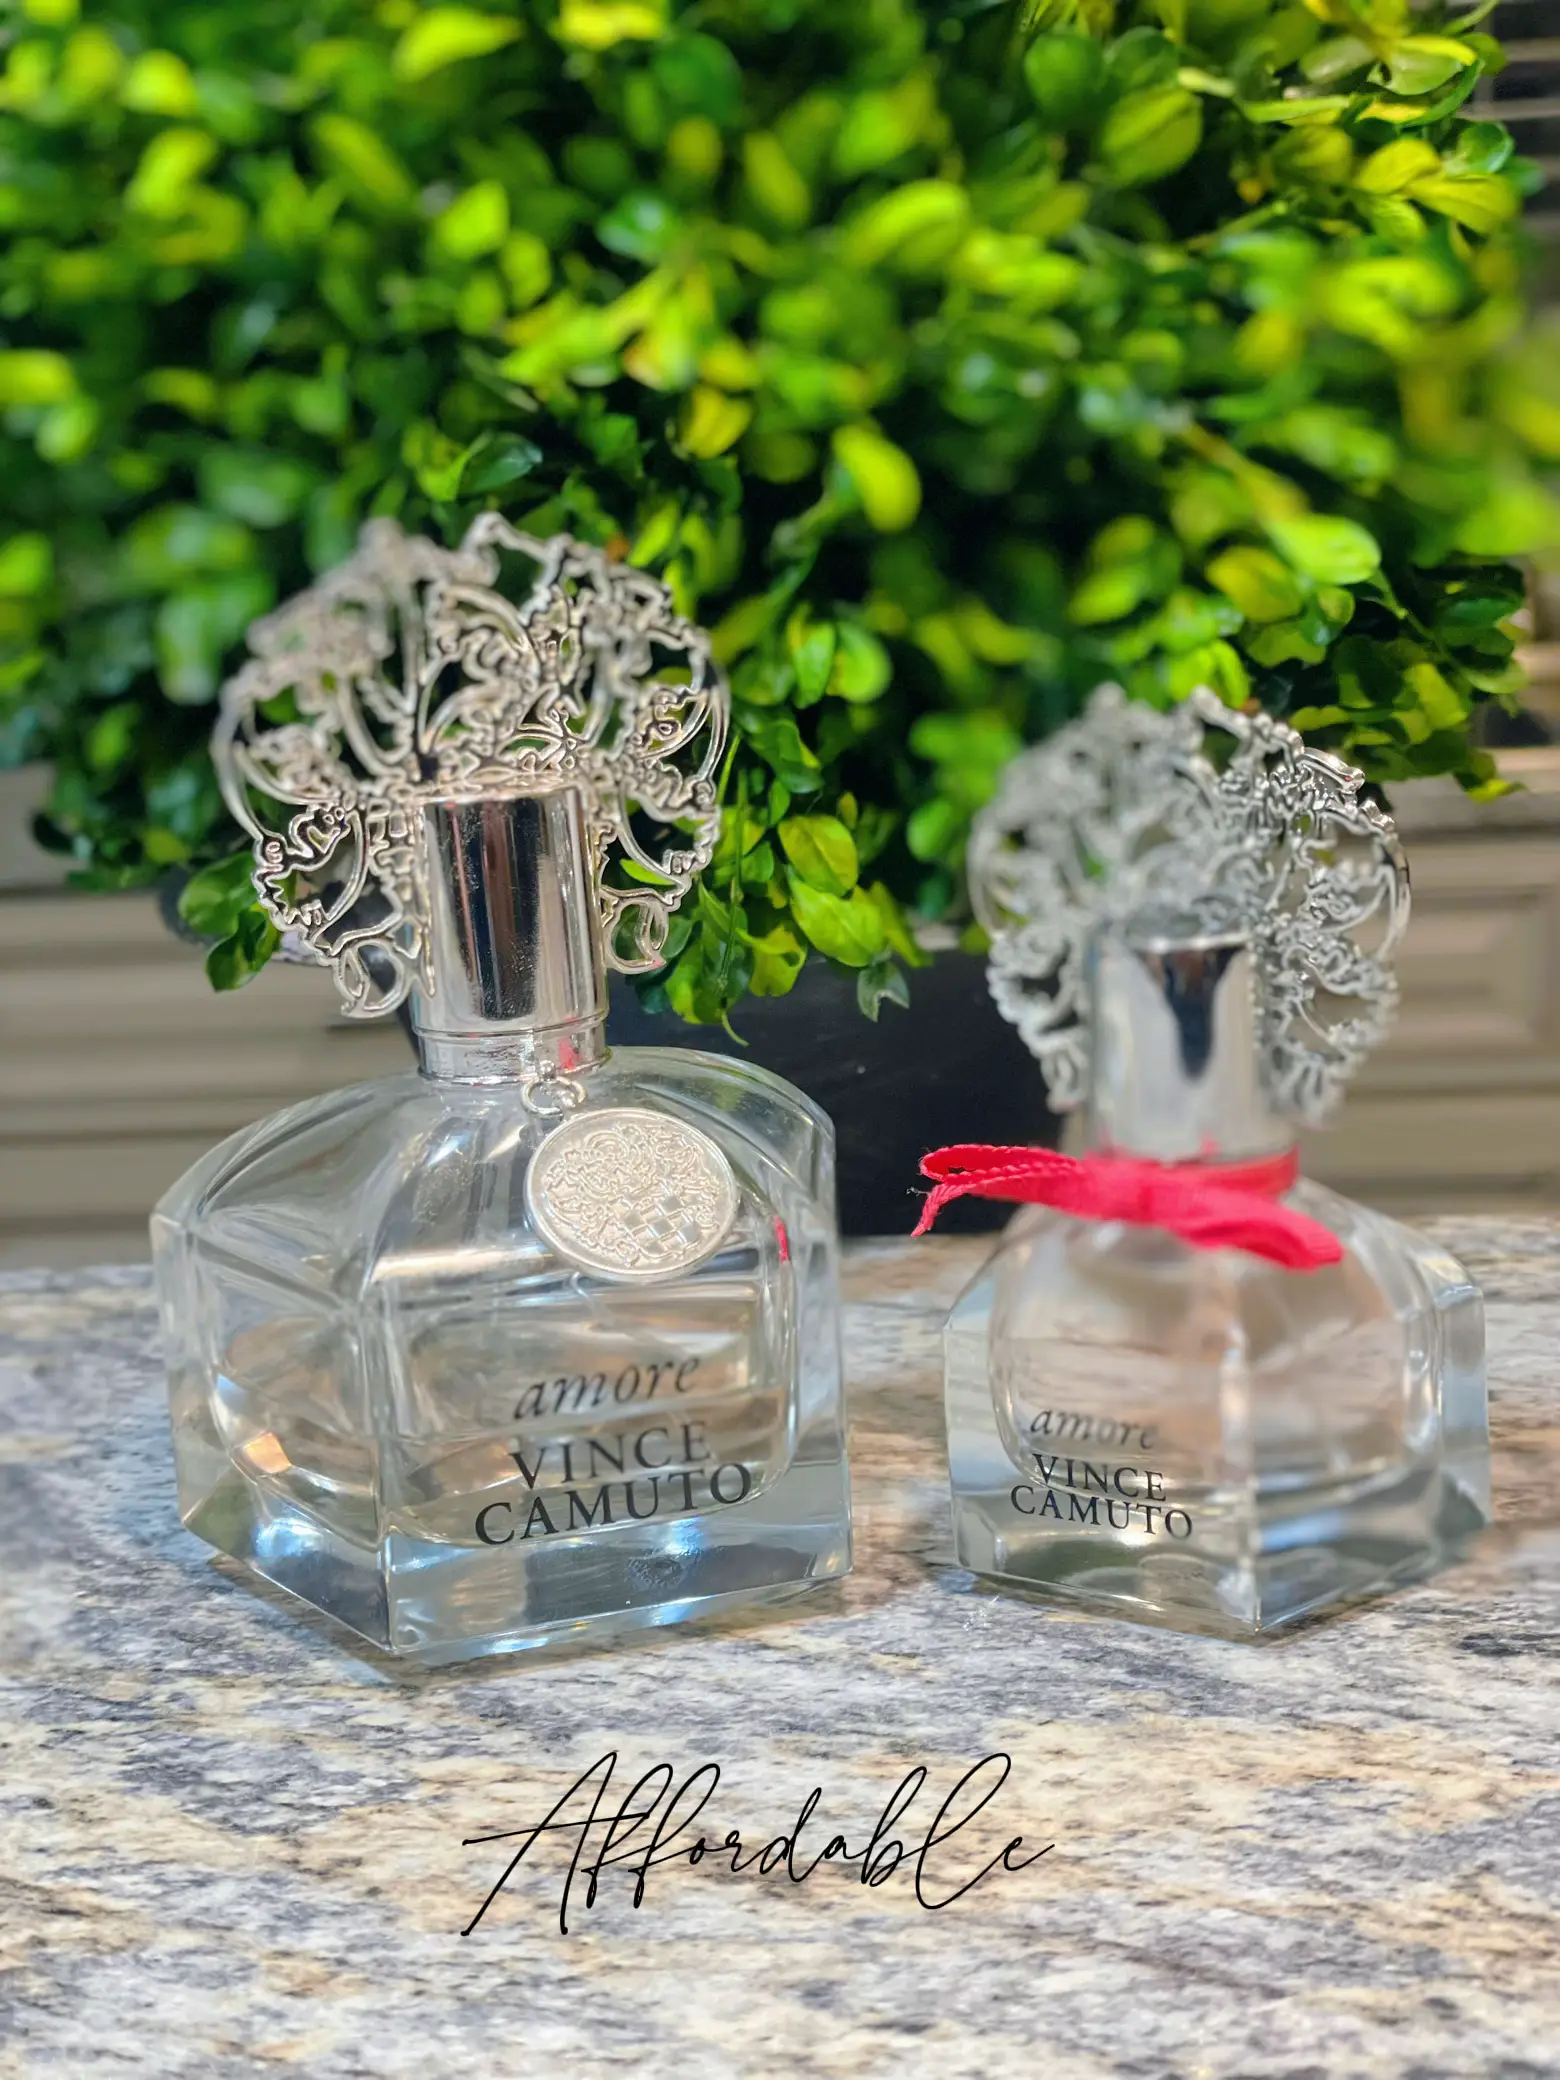 Vince Camuto Amore Perfume Review 